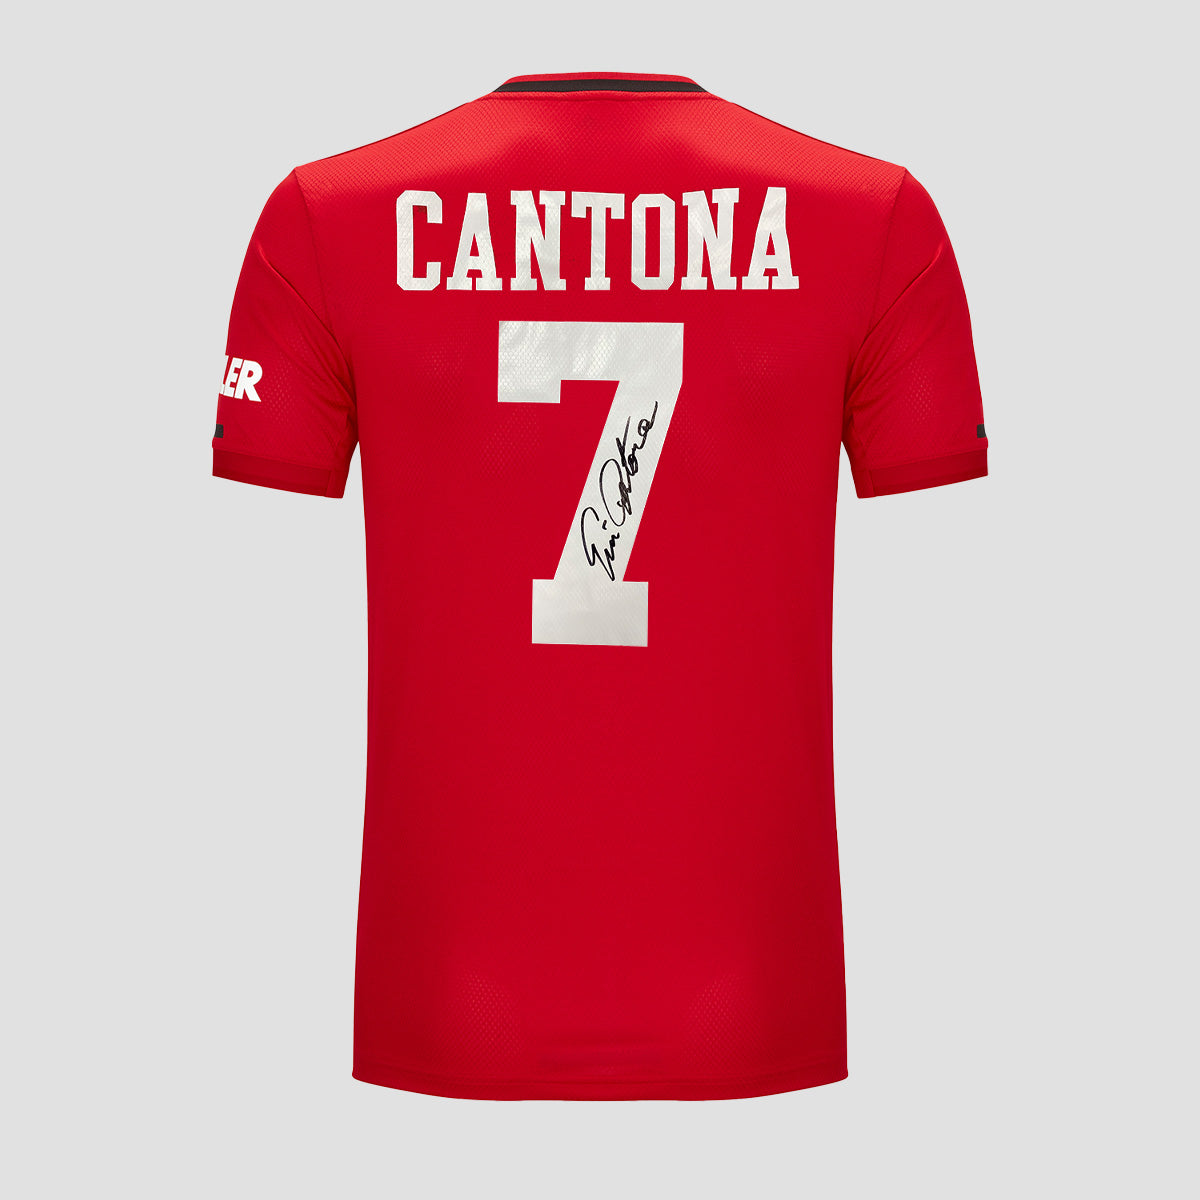 Eric Cantona 2019-20 Manchester United Signed #7 Home Shirt - The Bootroom Collection